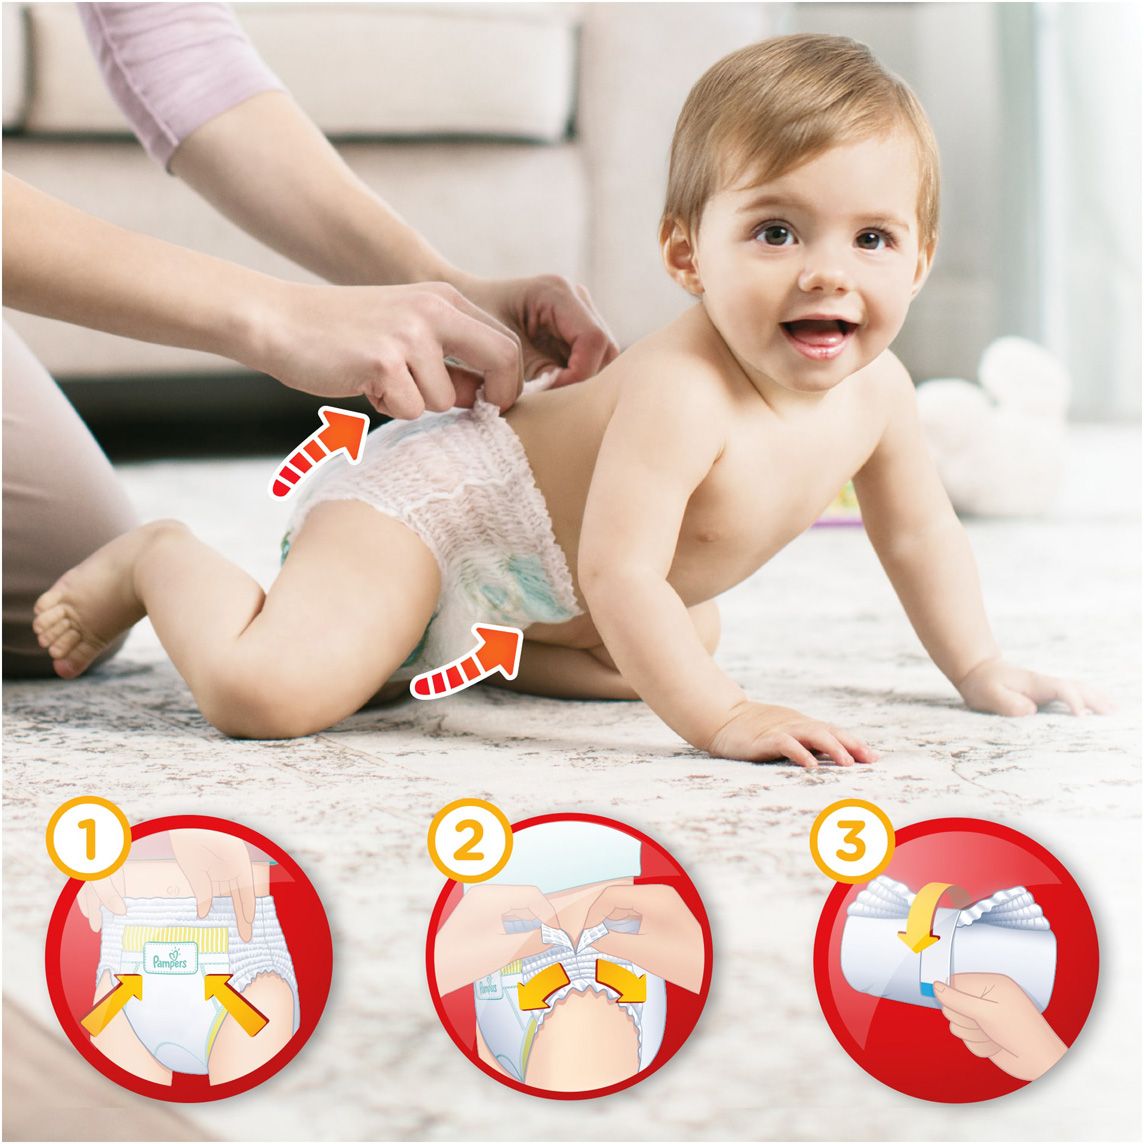 Pampers  Pants 9-15  ( 4) 176 